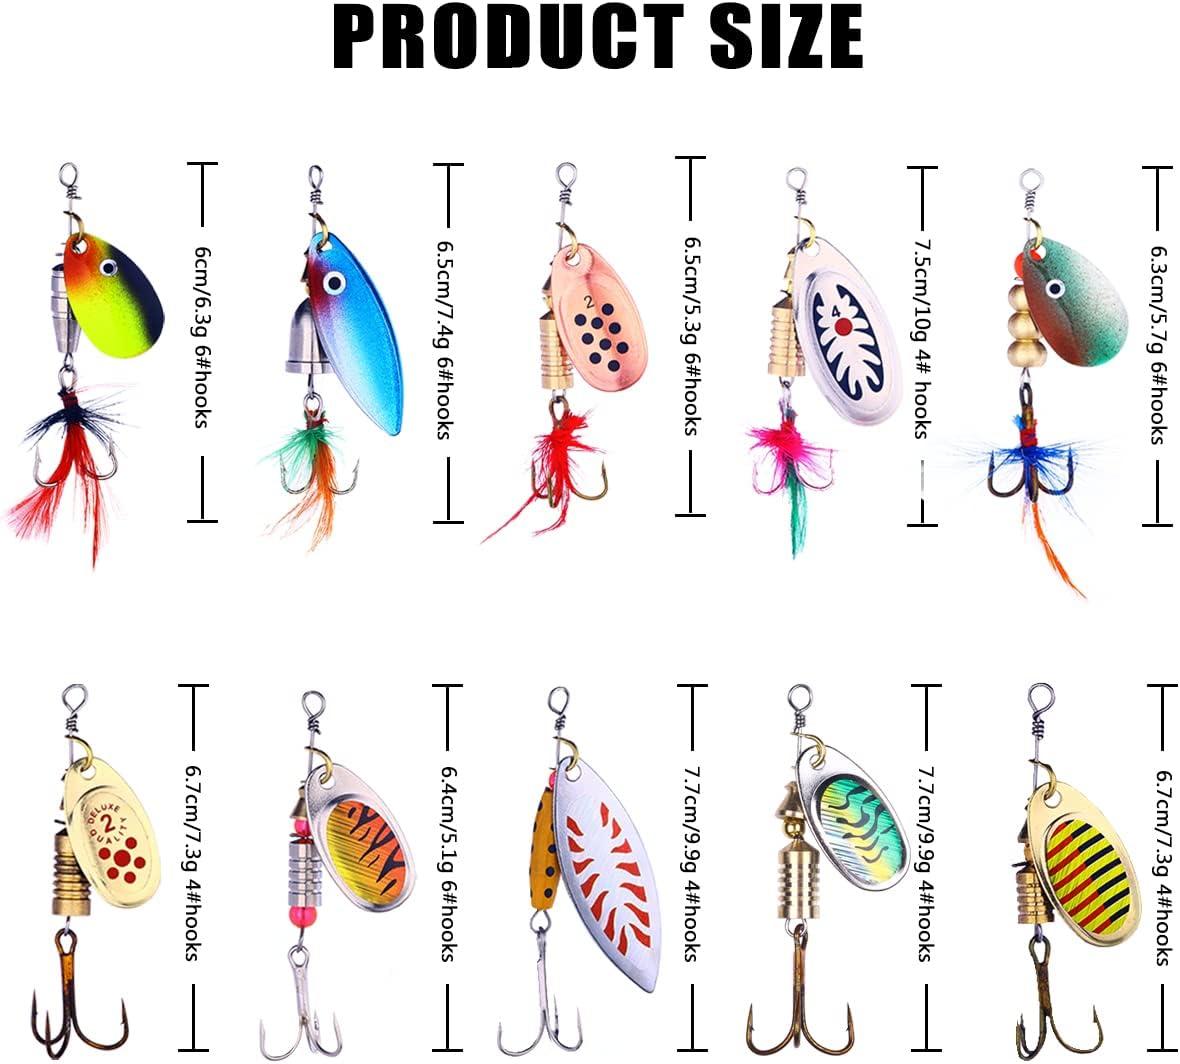 HENGJIA Trout Lures Spinner Baits with 2 Spoons, Rosster Tail Fishing  Lures, Spinnerbait for Bass Fishing Lures Kit for Trout, Pike, Steelhead  Freshwater Saltwater C-10PCS